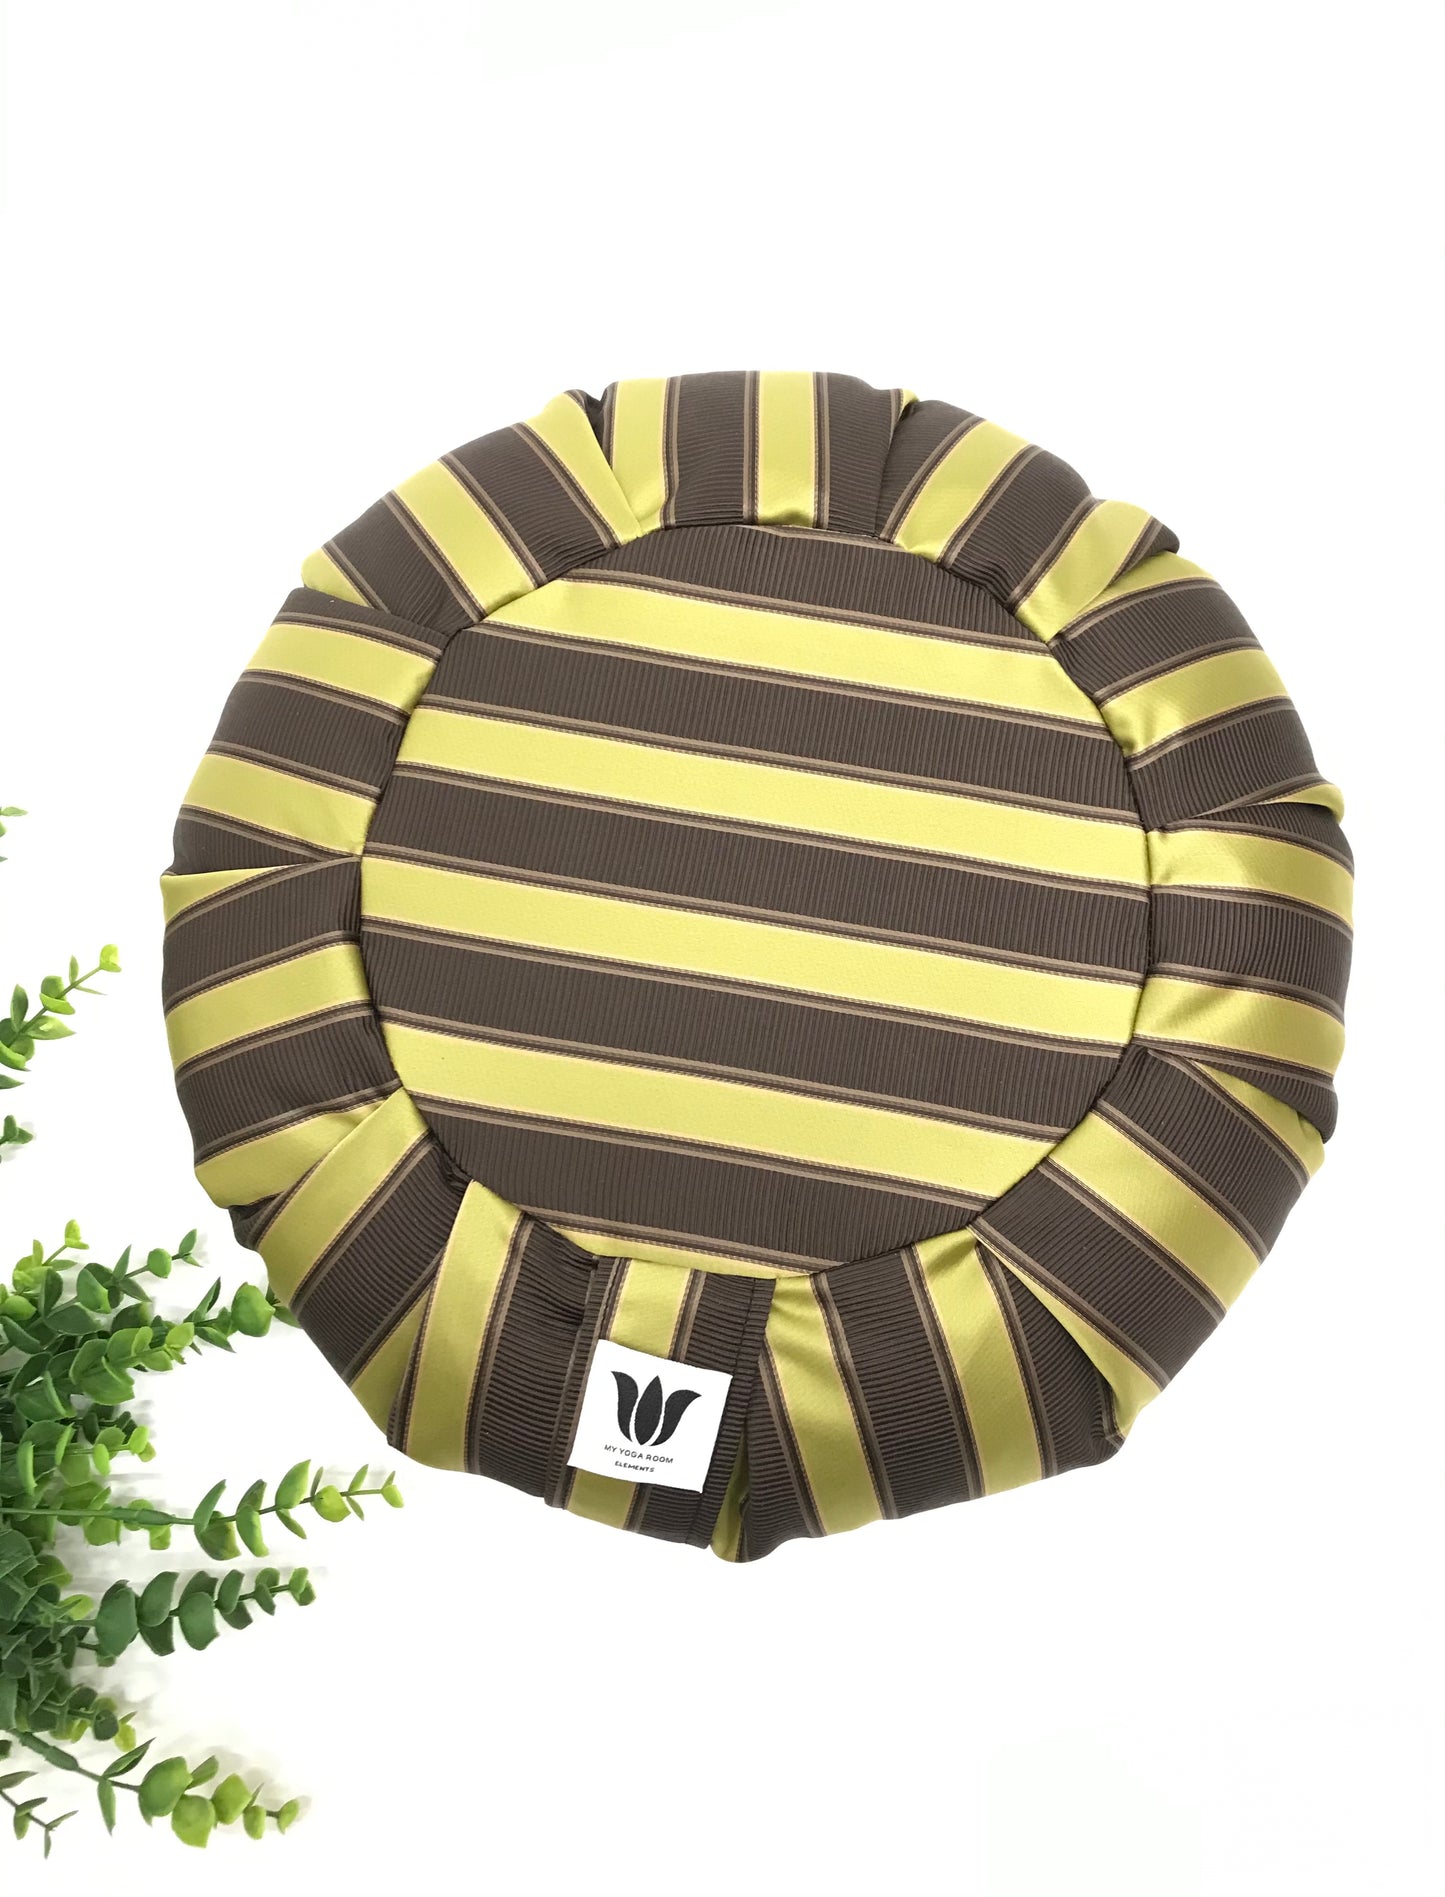 Handcrafted premium sateen home decor fabric meditation seat cushion in purple and gold-green stripe fabric. Align the spine and body in comfort to calm the monkey mind in your meditation practice. Handcrafted in Calgary, Alberta Canada